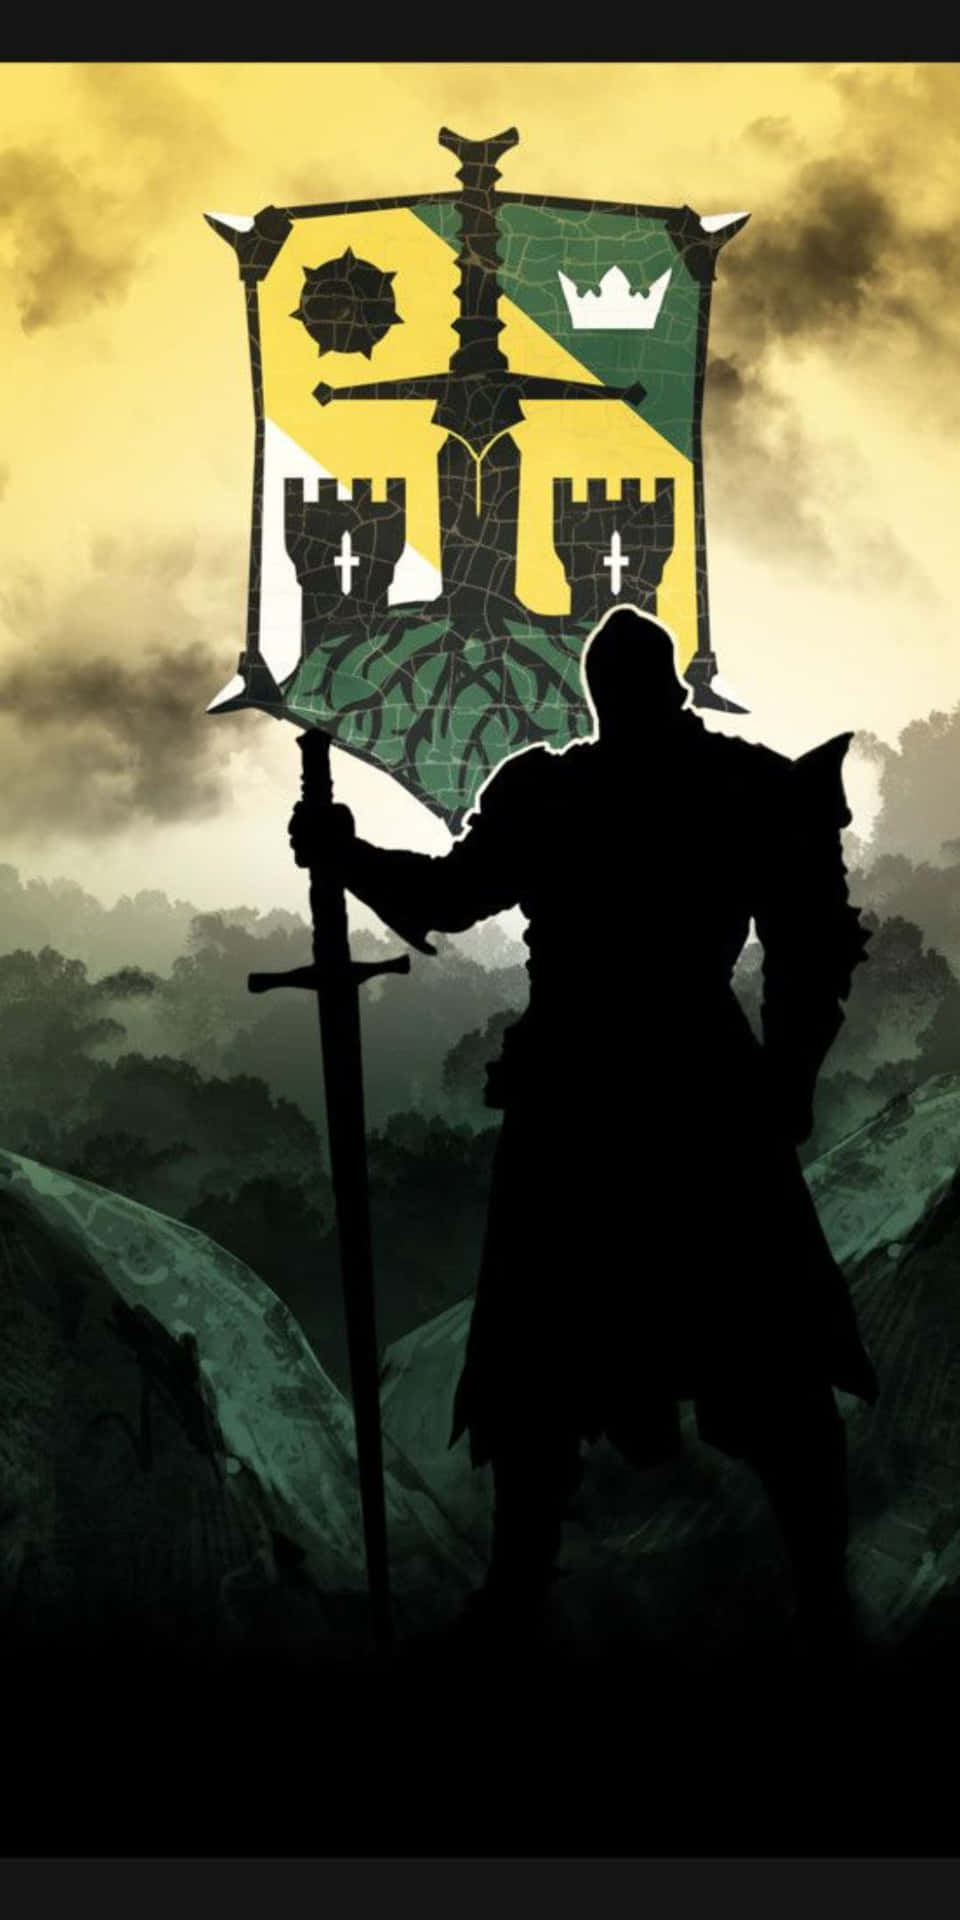 Pixel 3 For Honor Knight Silhouette Sigil Background Illustration